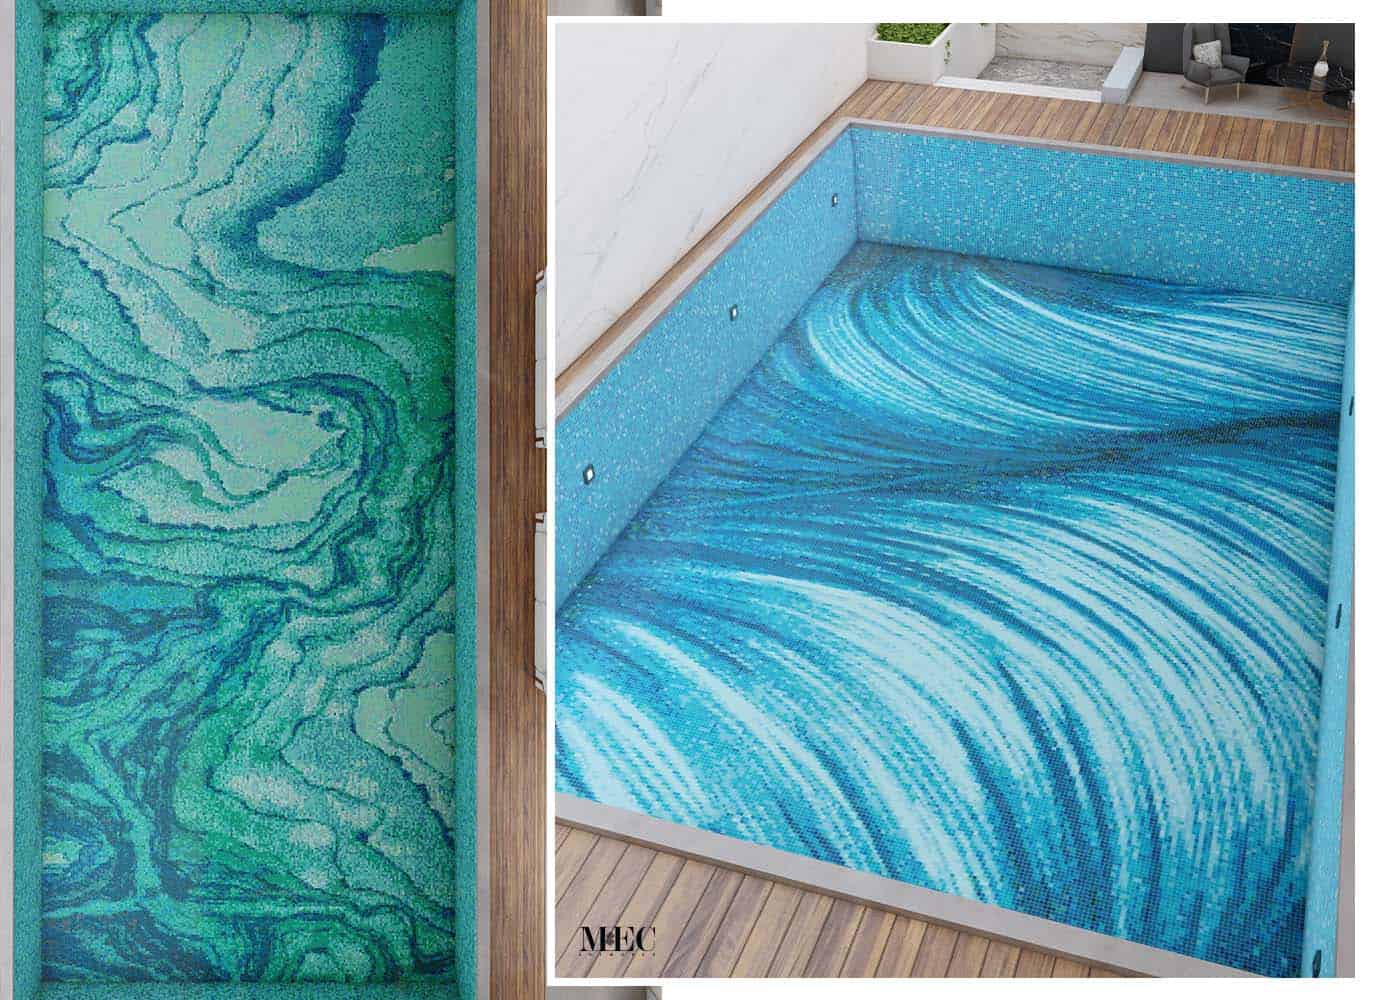 swirling blue and white design, mimicking flowing water. Both pools are surrounded by wooden decking, offering a long-lasting investment in pool mosaic art.